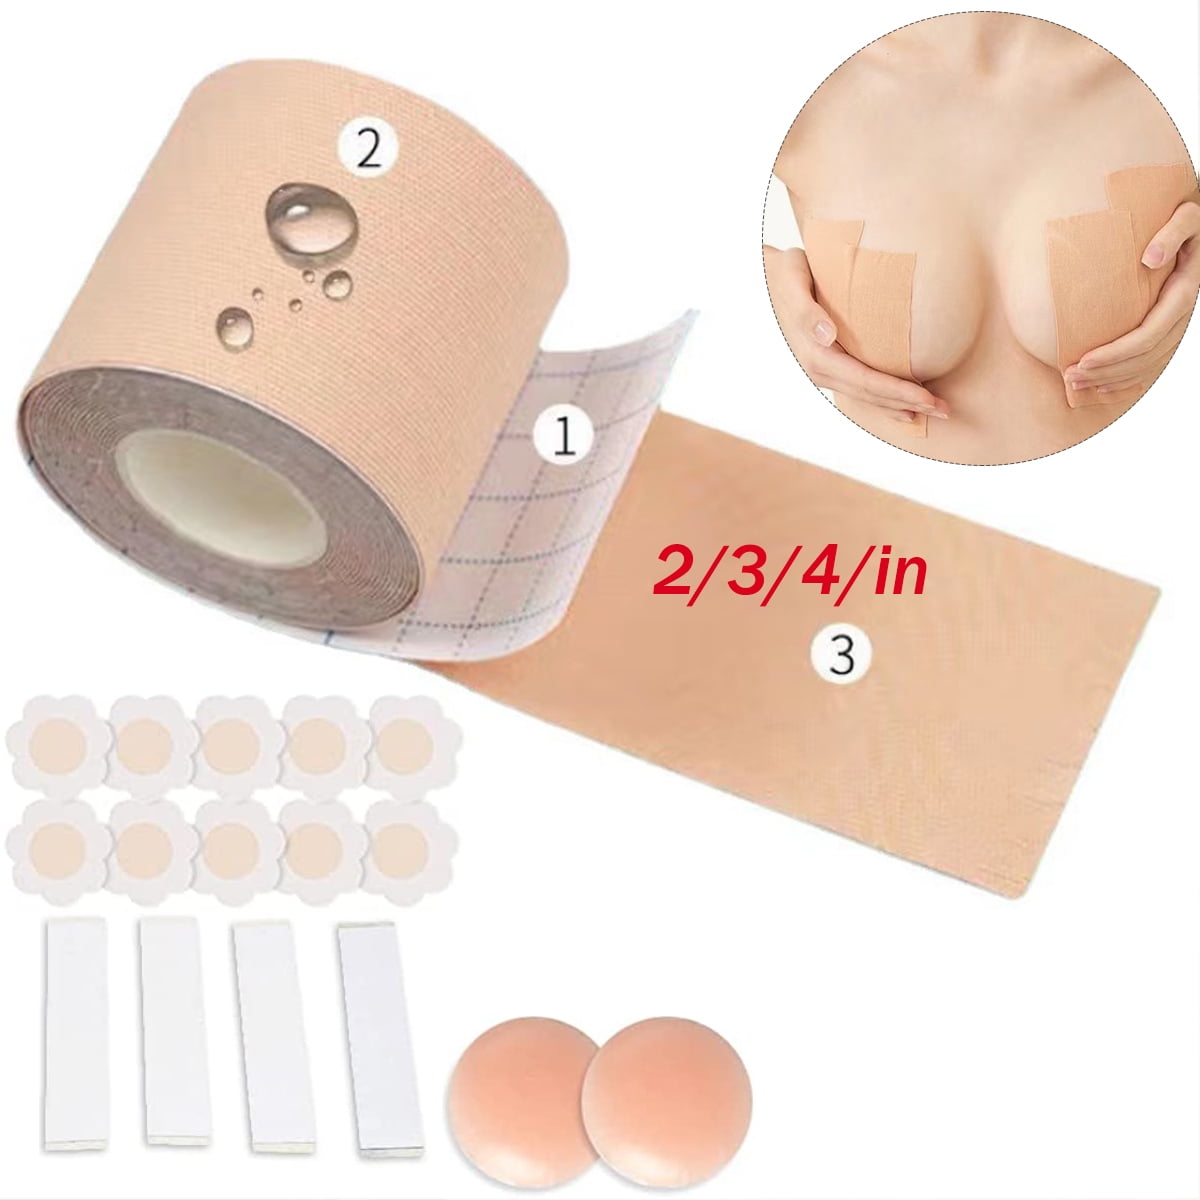  Boobytape for Breast Lift Plus Size, Boob Tape Breasts Lift Tape  for Women, Invisible Adhesive Bra, Backless Bras for Women Bob Tape for  Large Breasts, Body Tape with 2 pcs Nipple